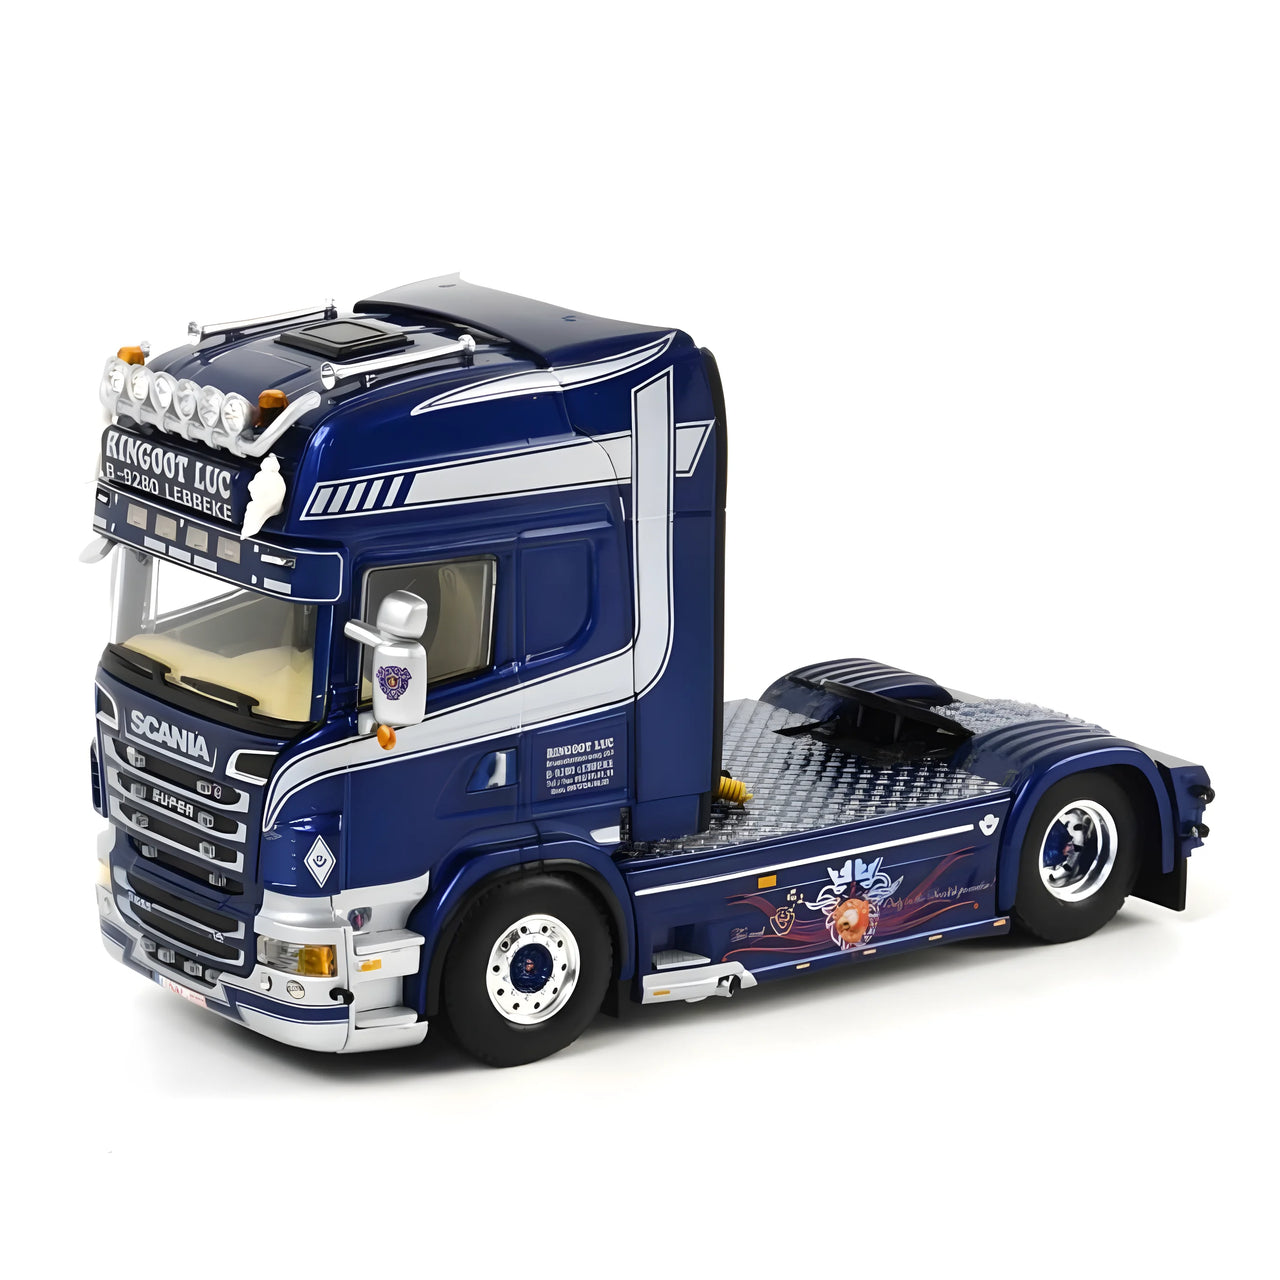 01-1180 Scania R6 Tractor 4x2 Scale 1:50 (Discontinued Model)